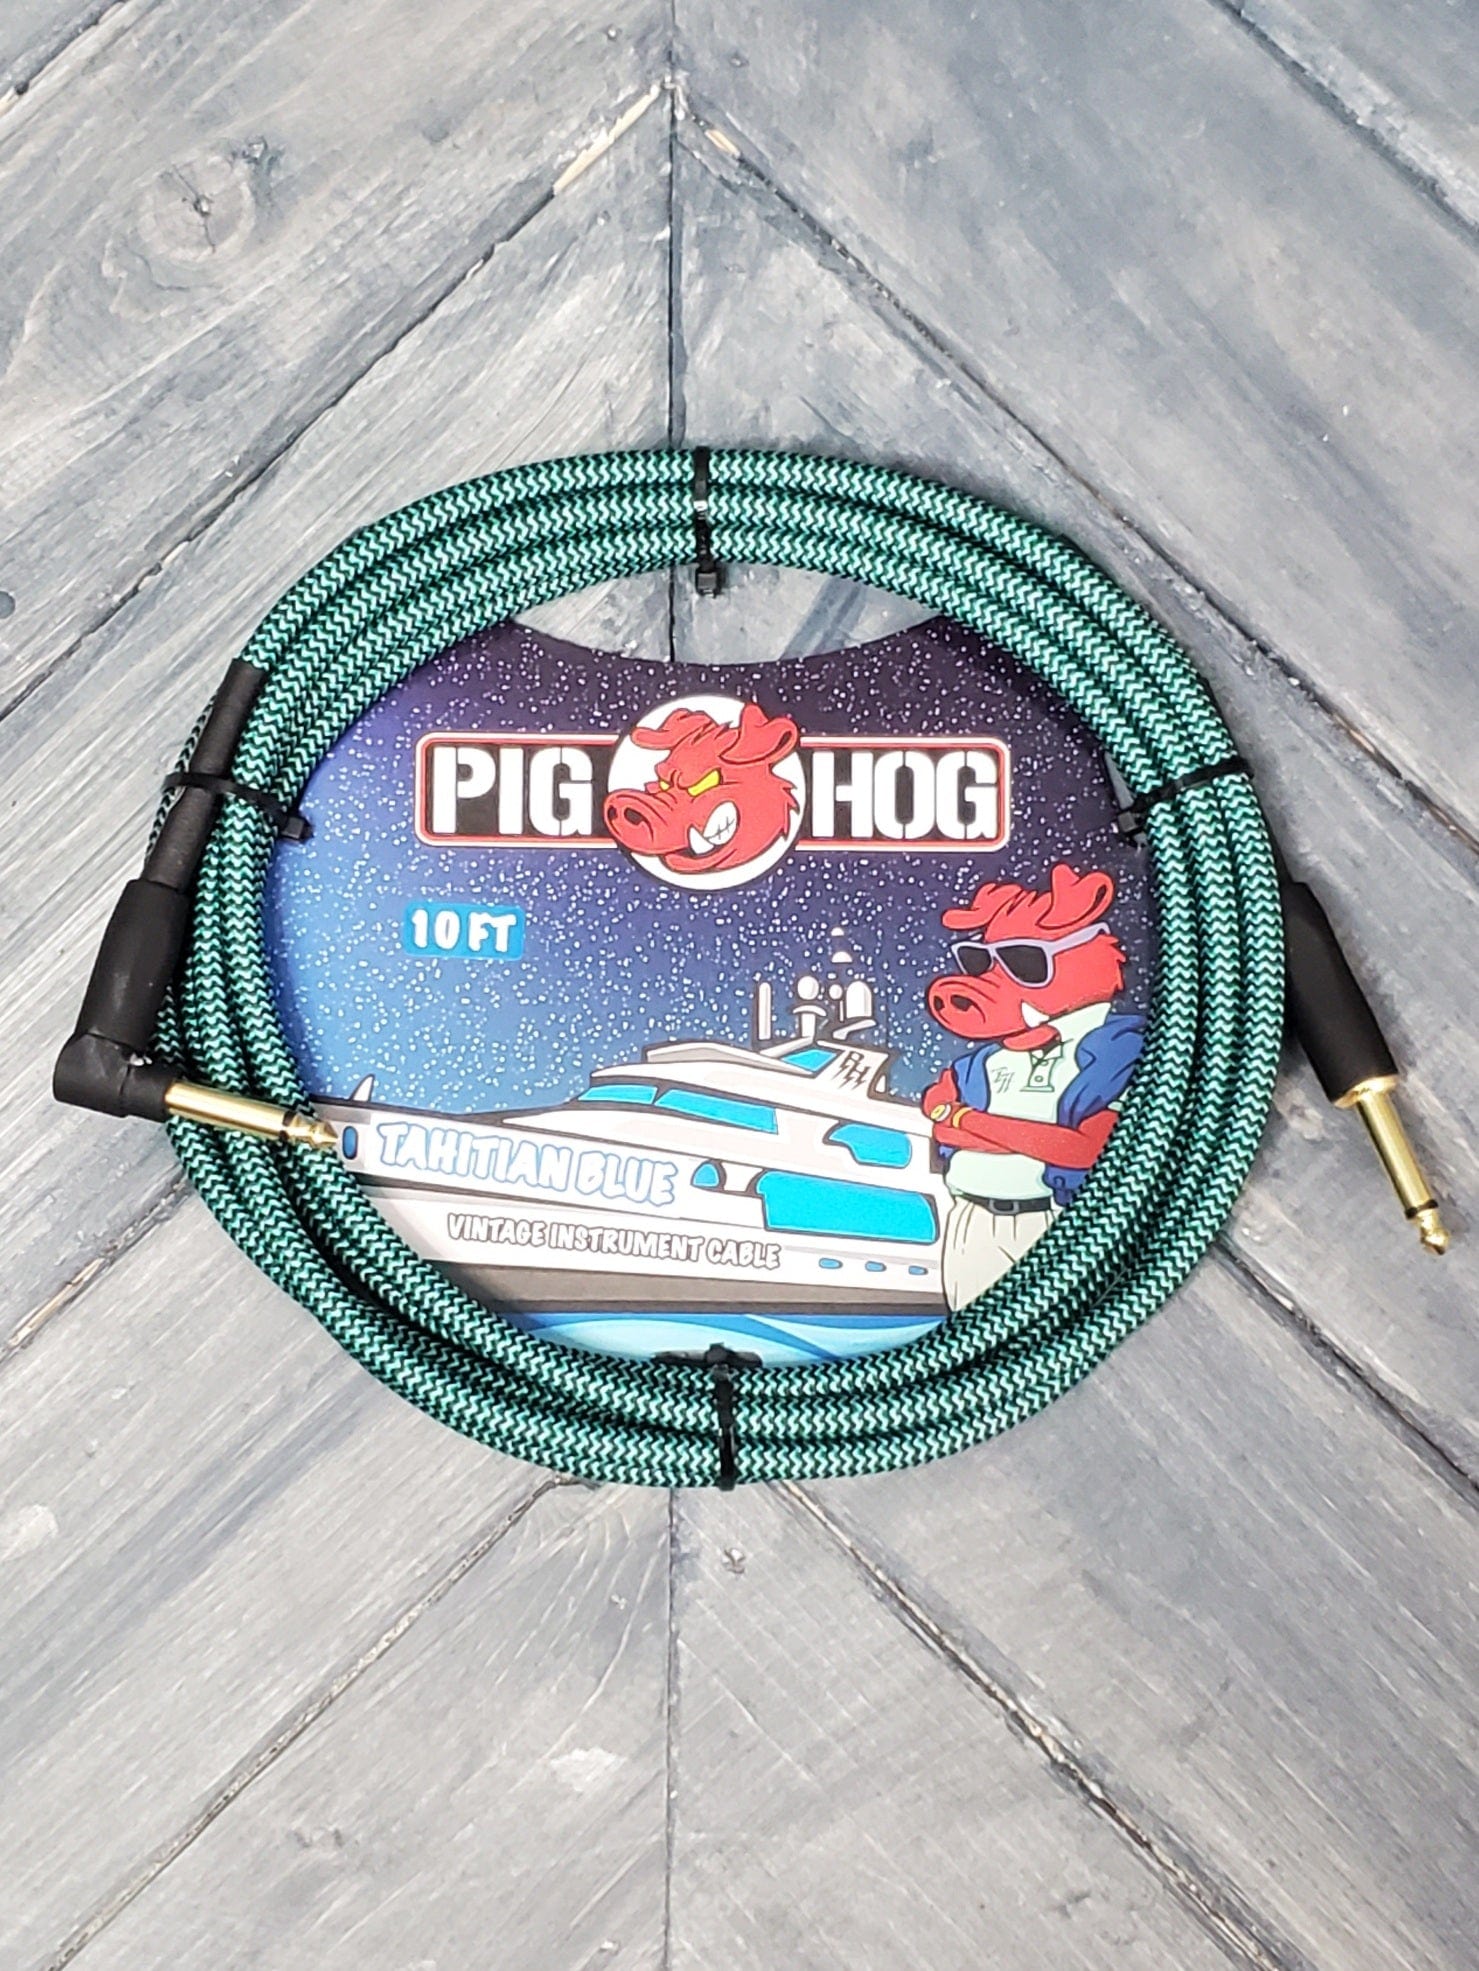 Pig Hog instrument cables Pig Hog PCH10TABR 10-Foot 1/4-1/4 Right Angle Instrument Cable